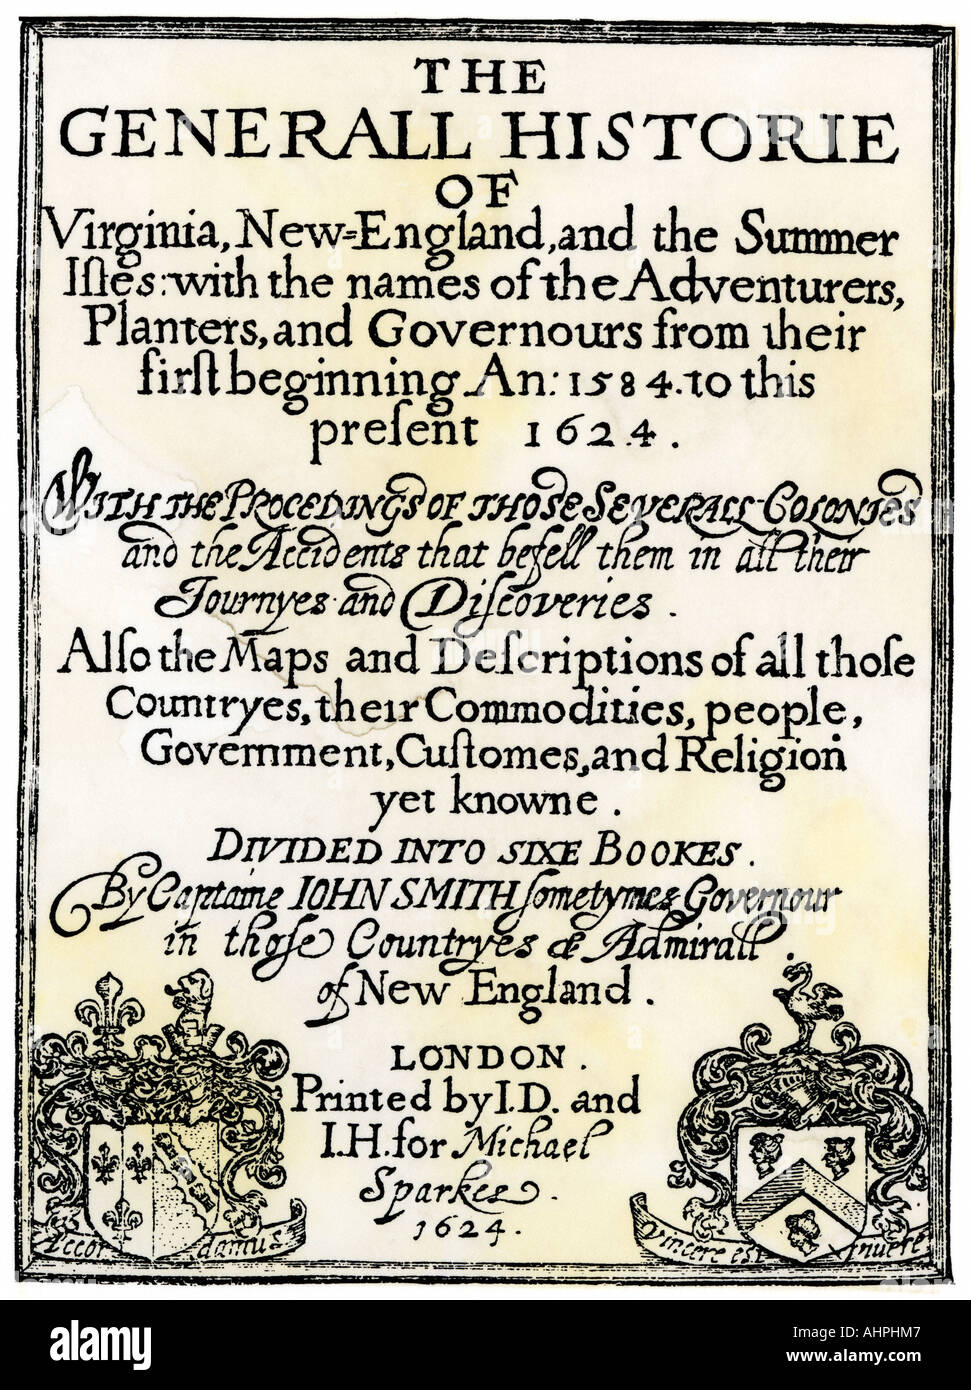 John Smith title page to his General Historie of Virginia New England and the Summer Isles printed in 1624. Woodcut with a watercolor wash Stock Photo